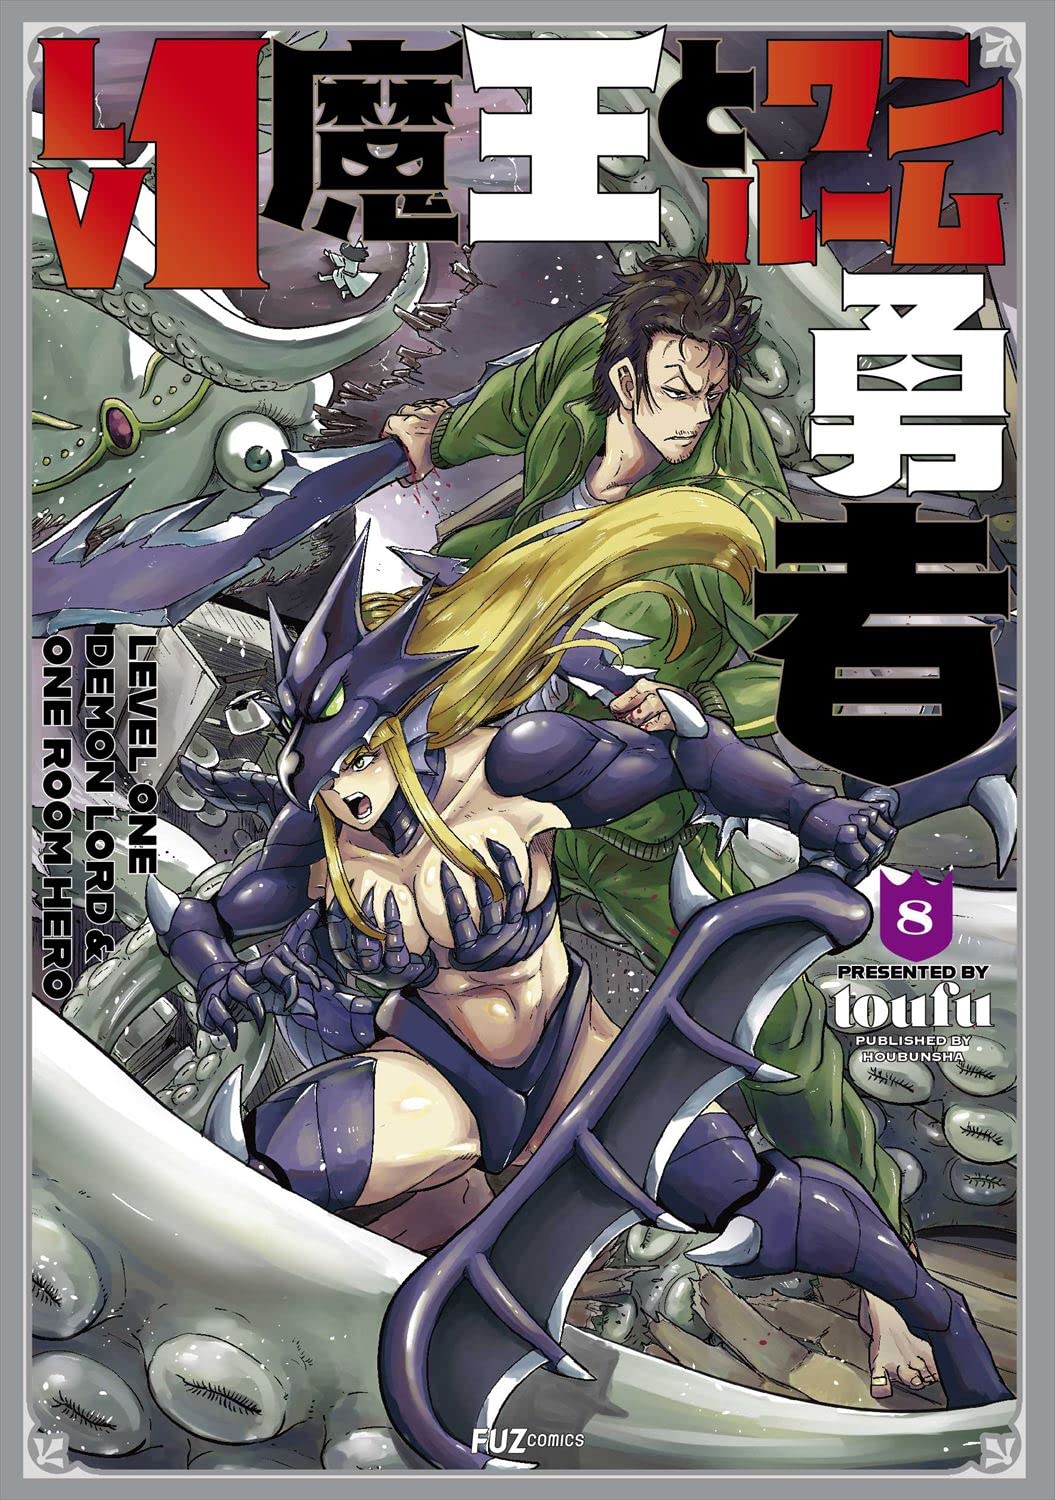 Level 1 Demon Lord and One Room Hero Vol. 1 on Apple Books